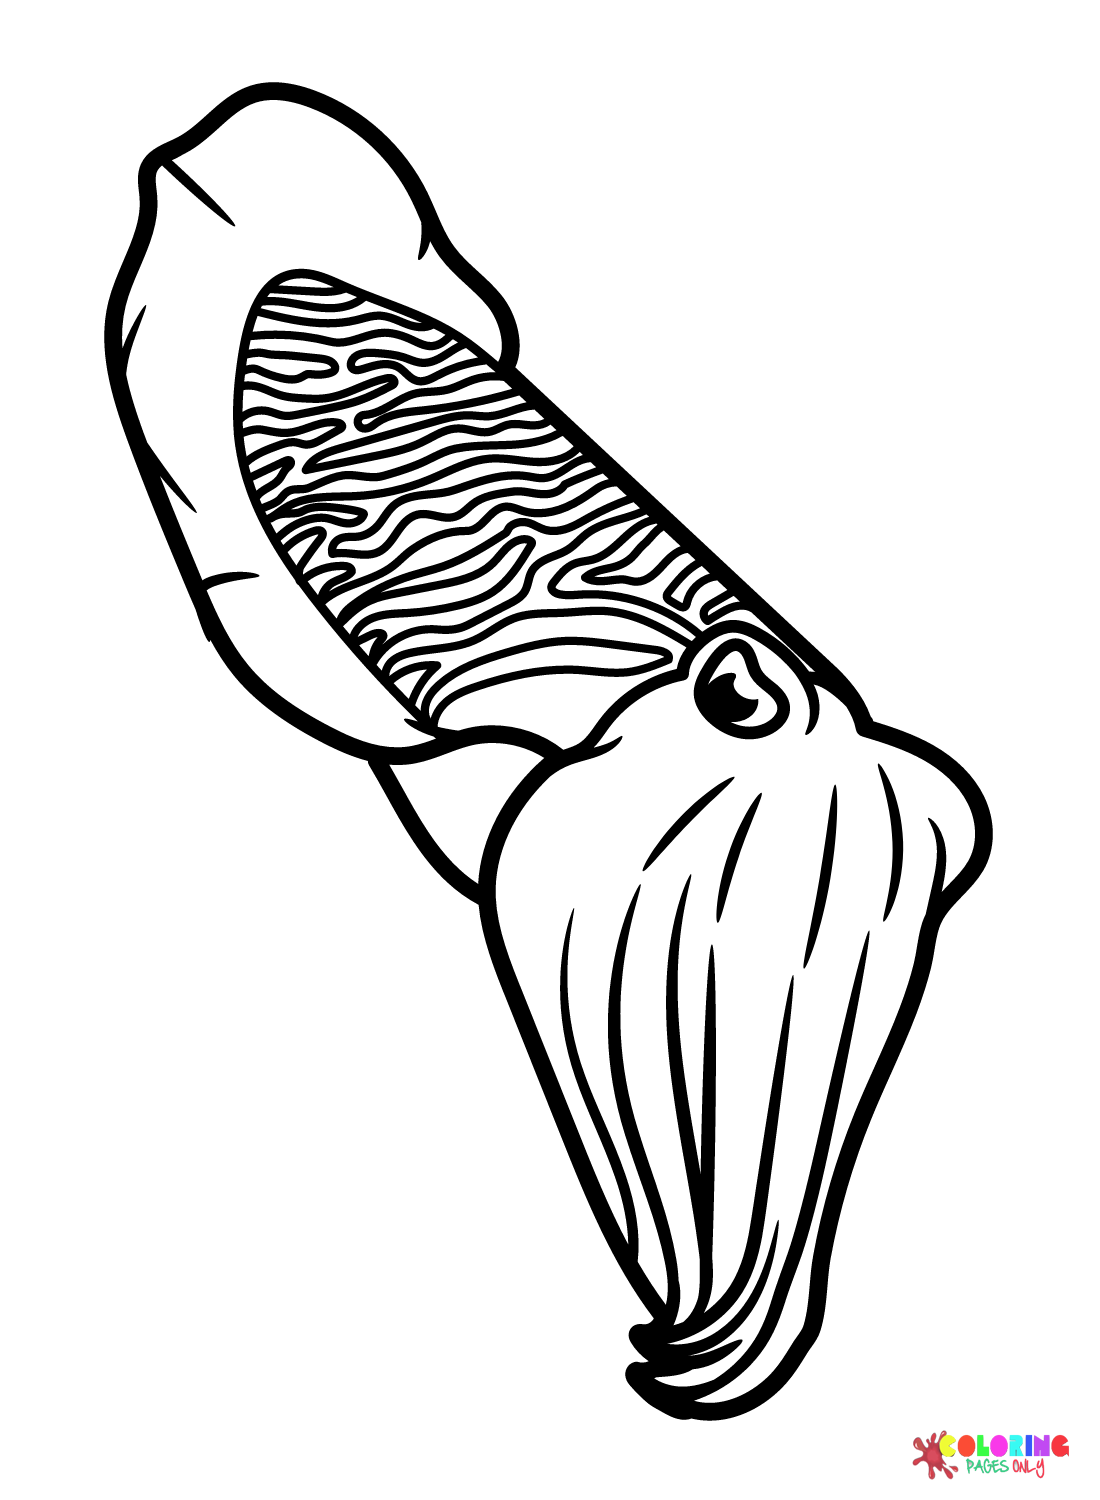 Cuttlefish Images Coloring Page